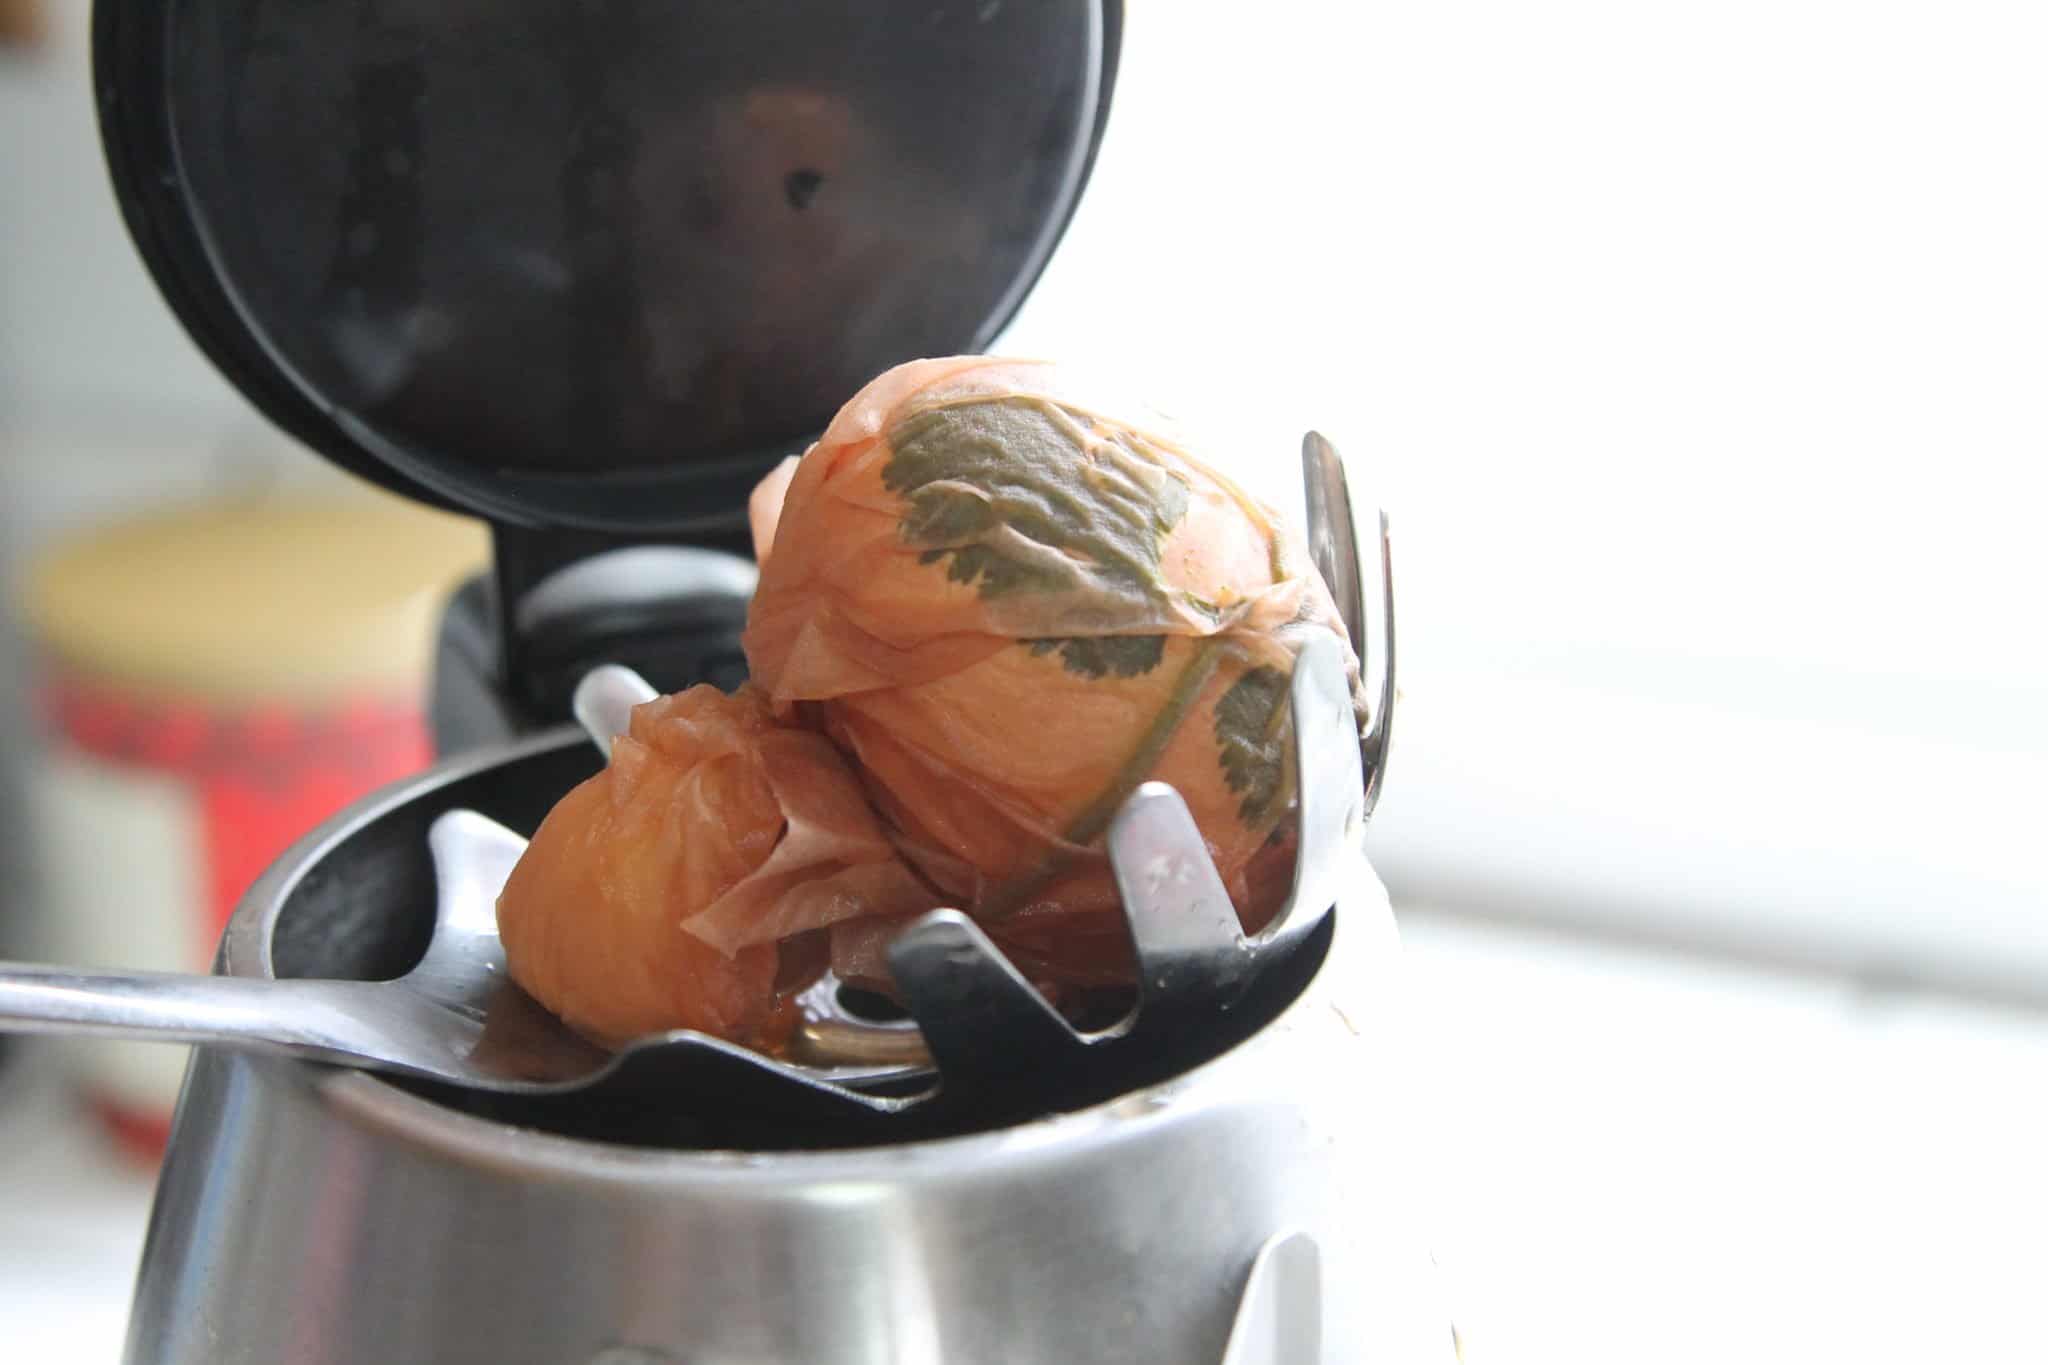 Easter eggs being removed from tea kettle